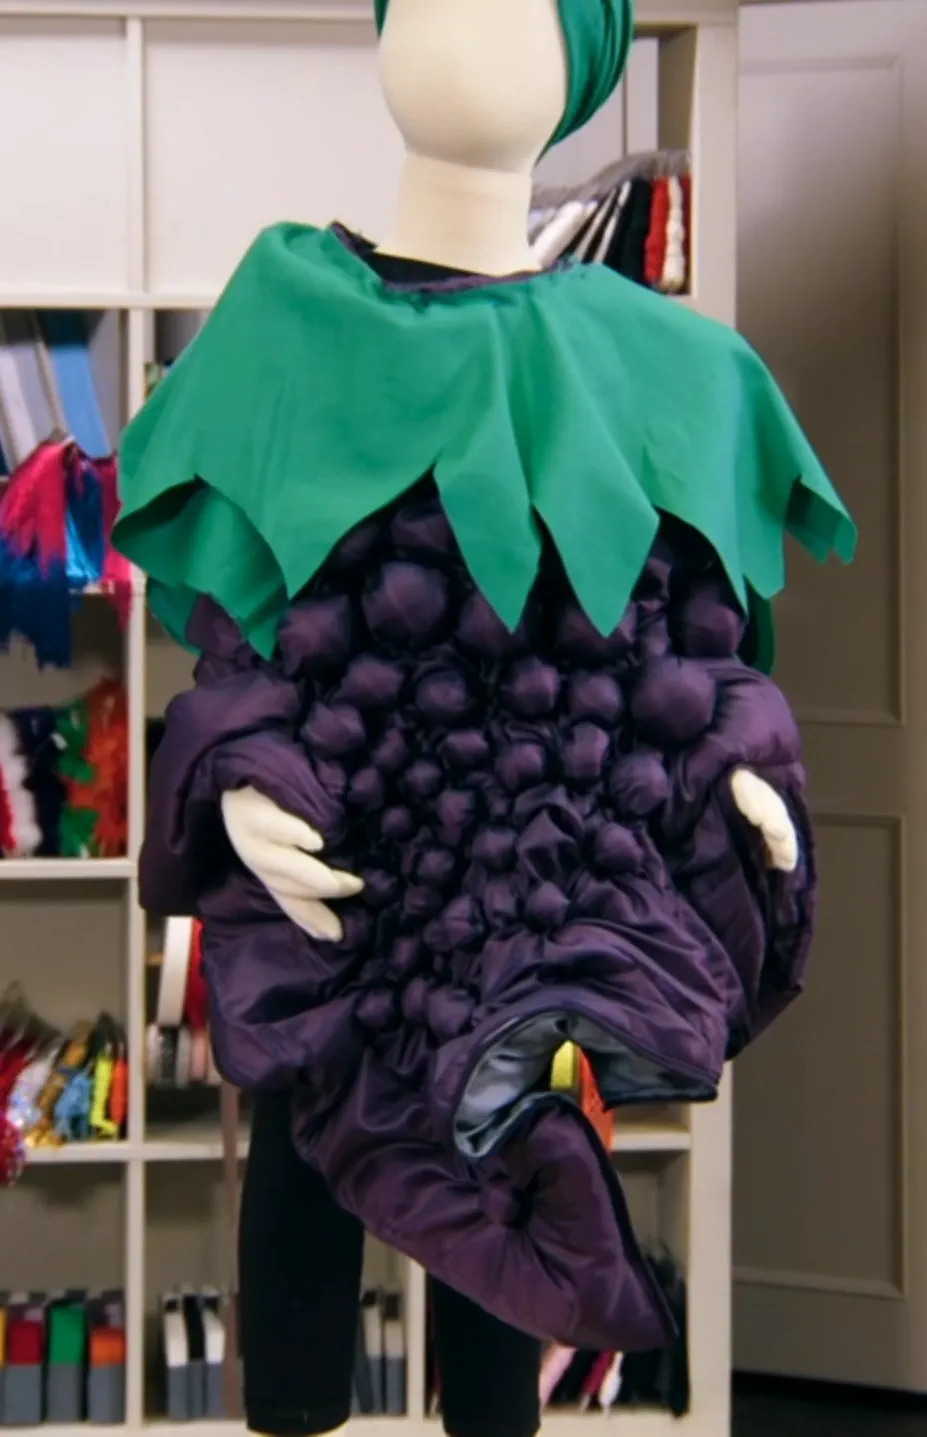 Fancy dress - sleeping bag transformed into a bunch of grapes